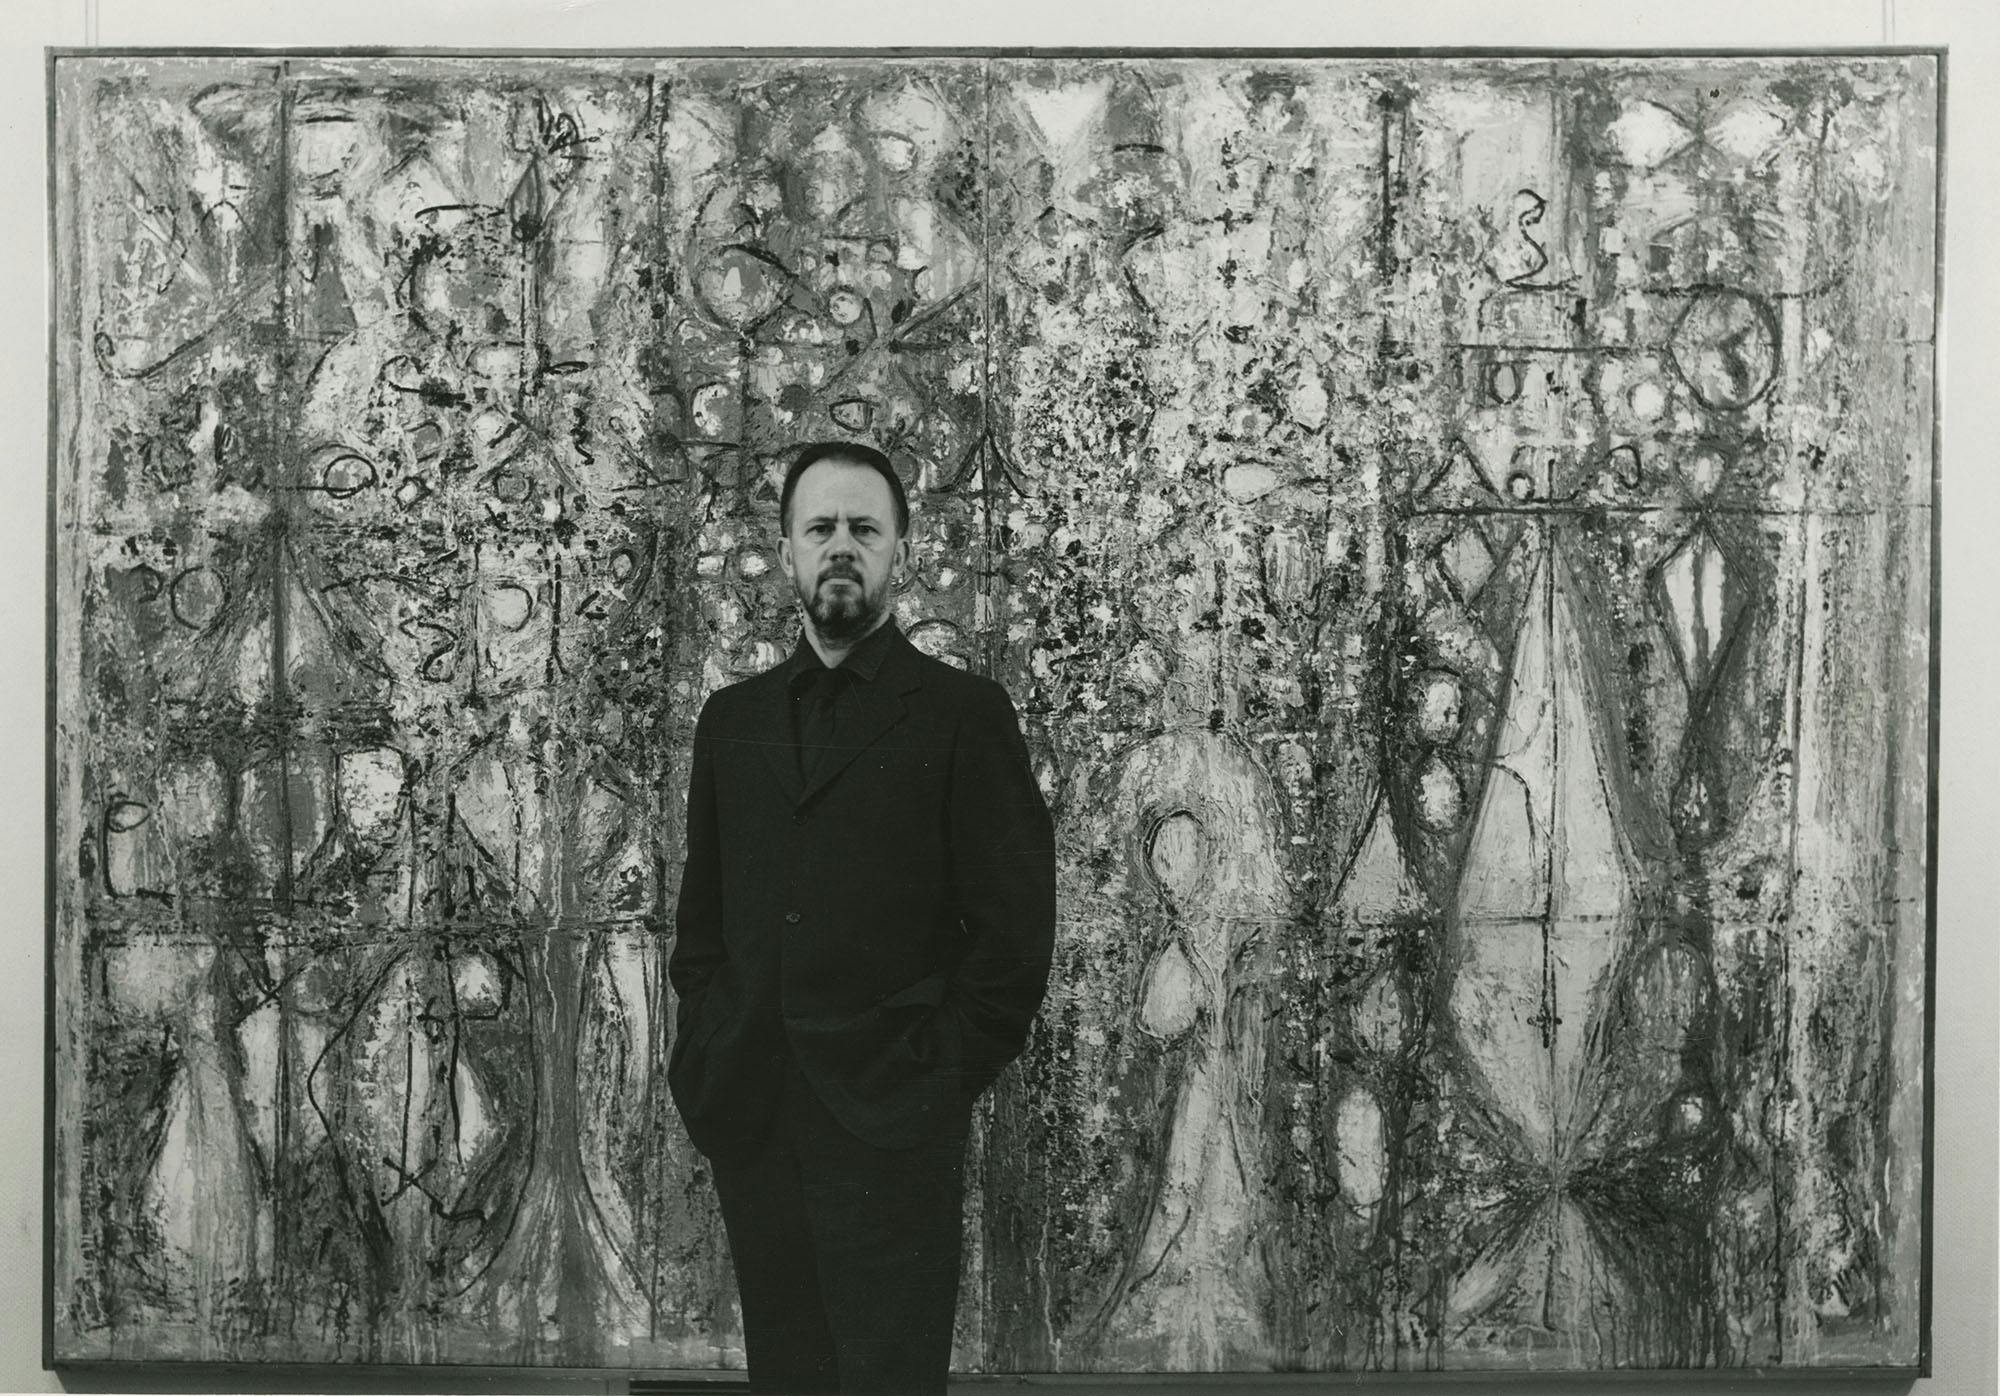 Richard Pousette-Dart with Blood Wedding, Whitney Museum of American Art, New York, NY, 1963. – The Richard Pousette-Dart Foundation